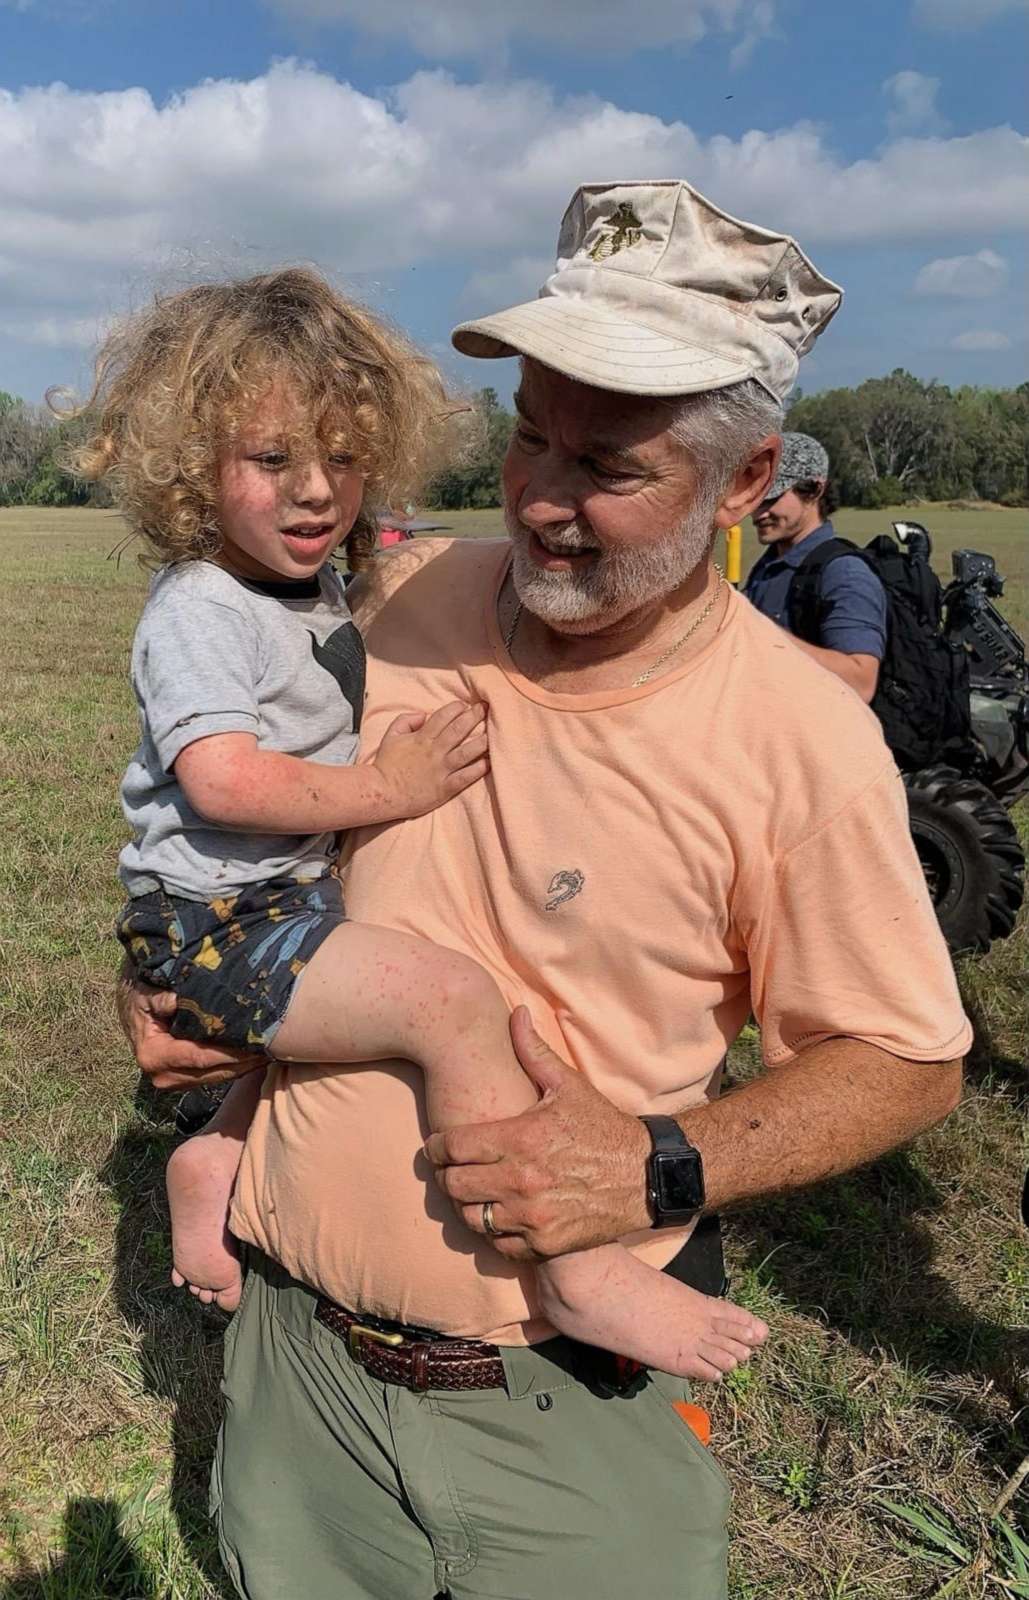 PHOTO: Joshua "JJ" Rowland a missing toddler has been found by volunteer searchers in Hernando County, Fla., on Feb. 24, 2023.